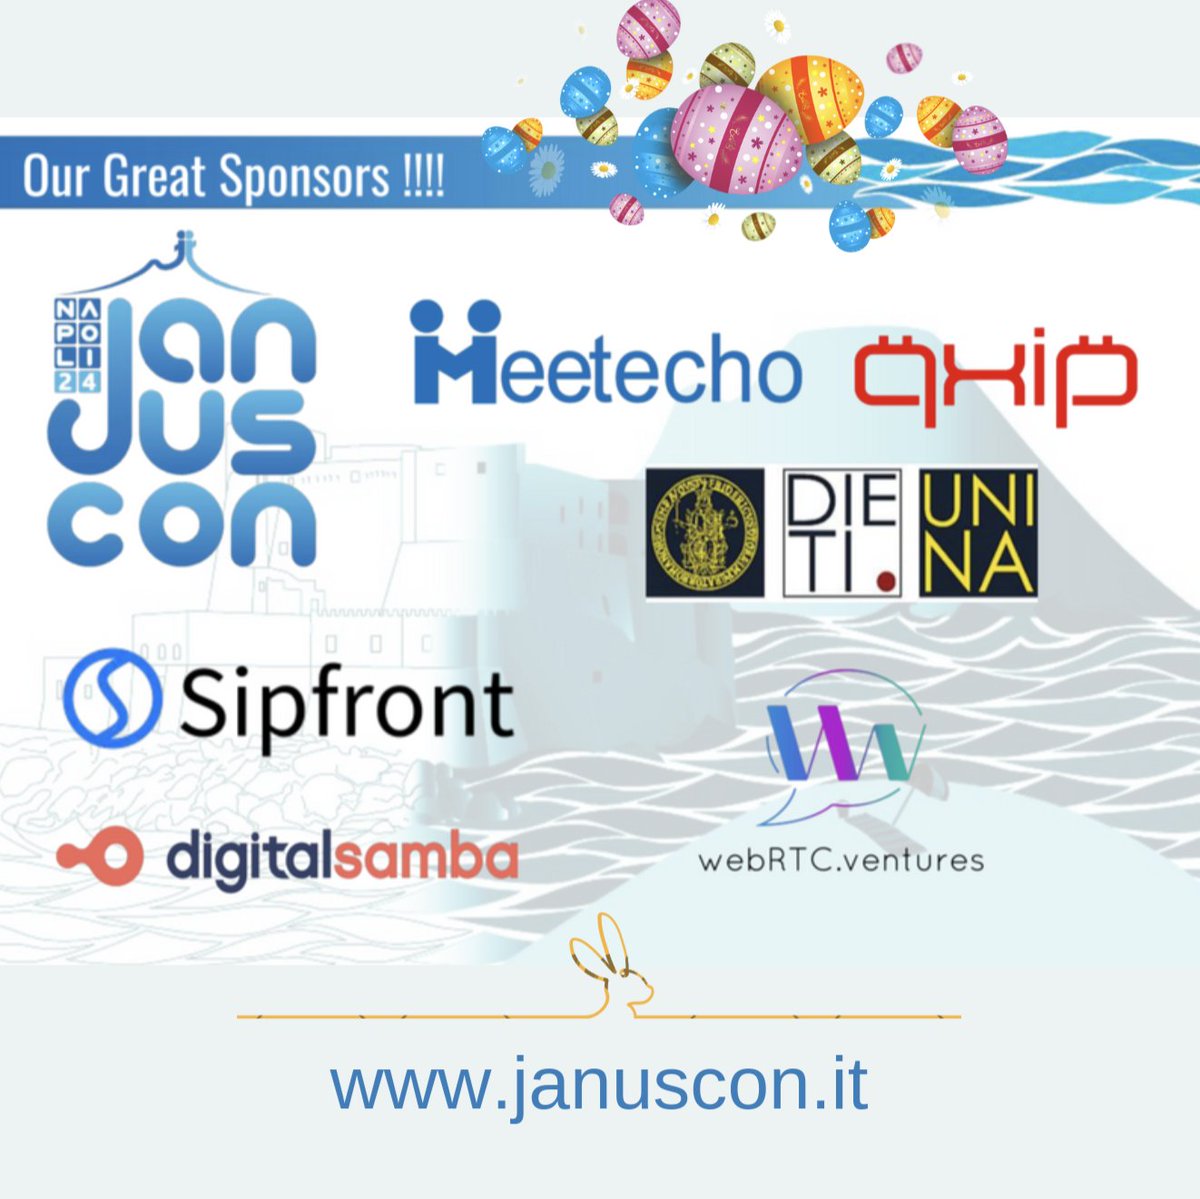 We want to wish you all a Happy Easter if you celebrate, or else, have a great weekend! 🐰And we do it by once again thanking the organizers and our sponsors, as a symbol of support and sharing!Next week will be April, finally the month of #JanusCon! januscon.it 🌷🐣